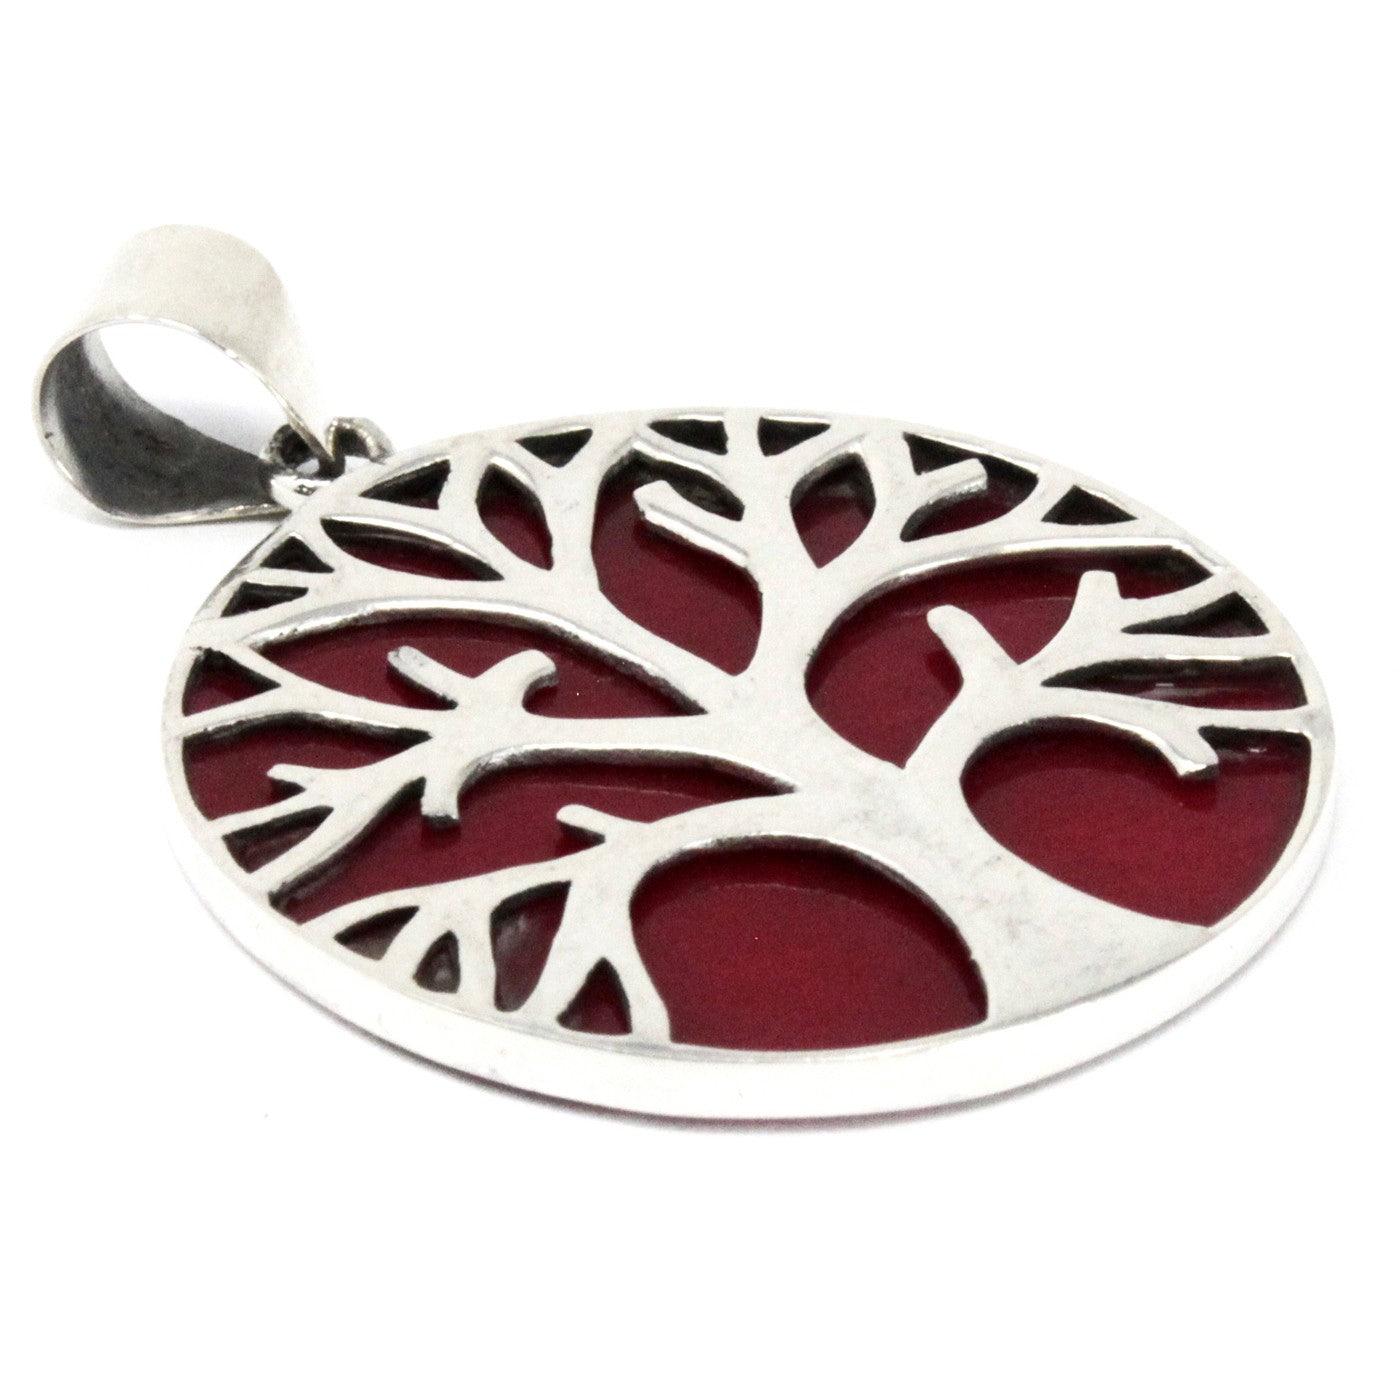 Tree of Life Silver Pendant 30mm - Coral Effect - Charming Spaces